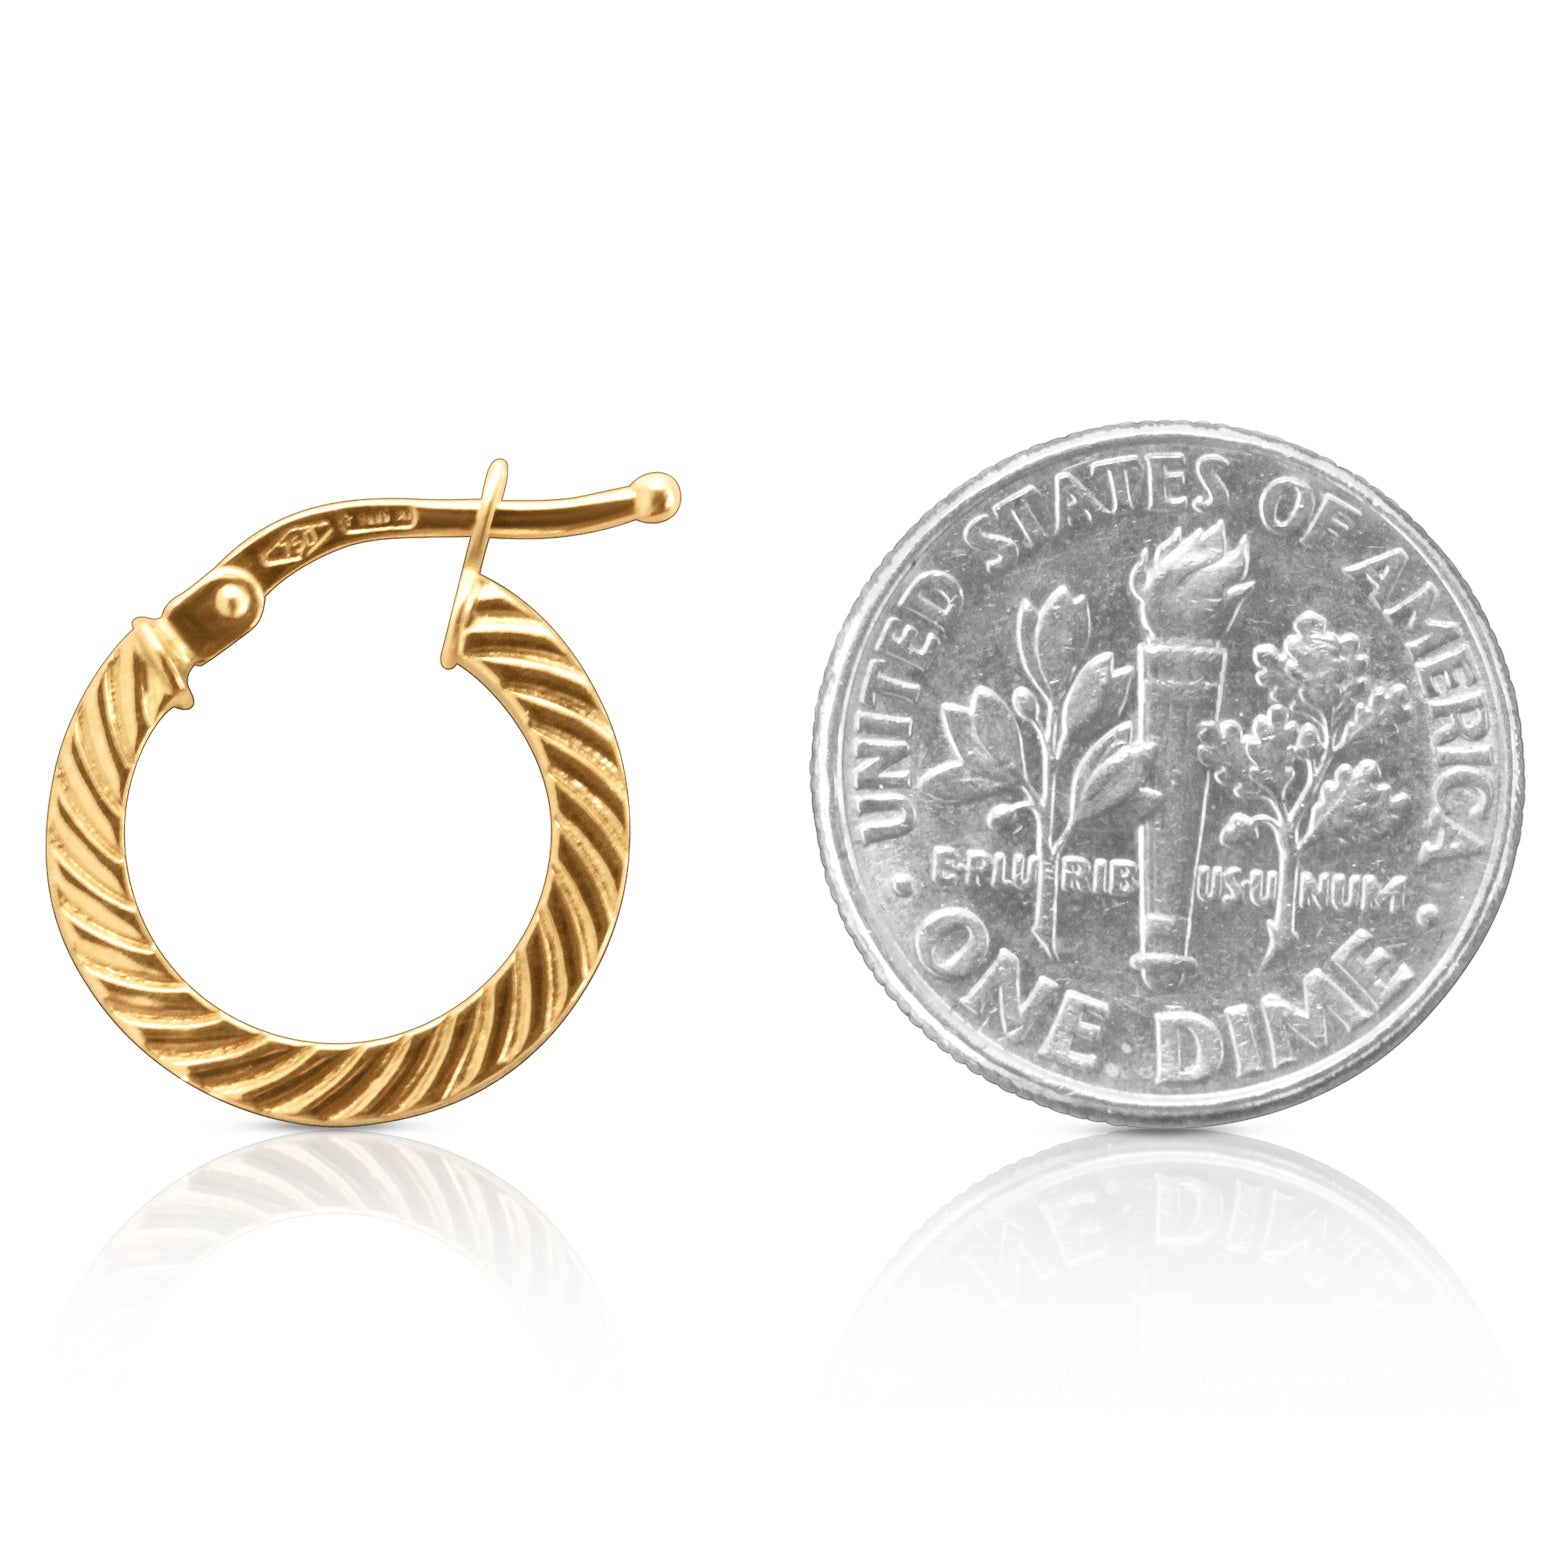 Classic gold hoops earrings size comparison